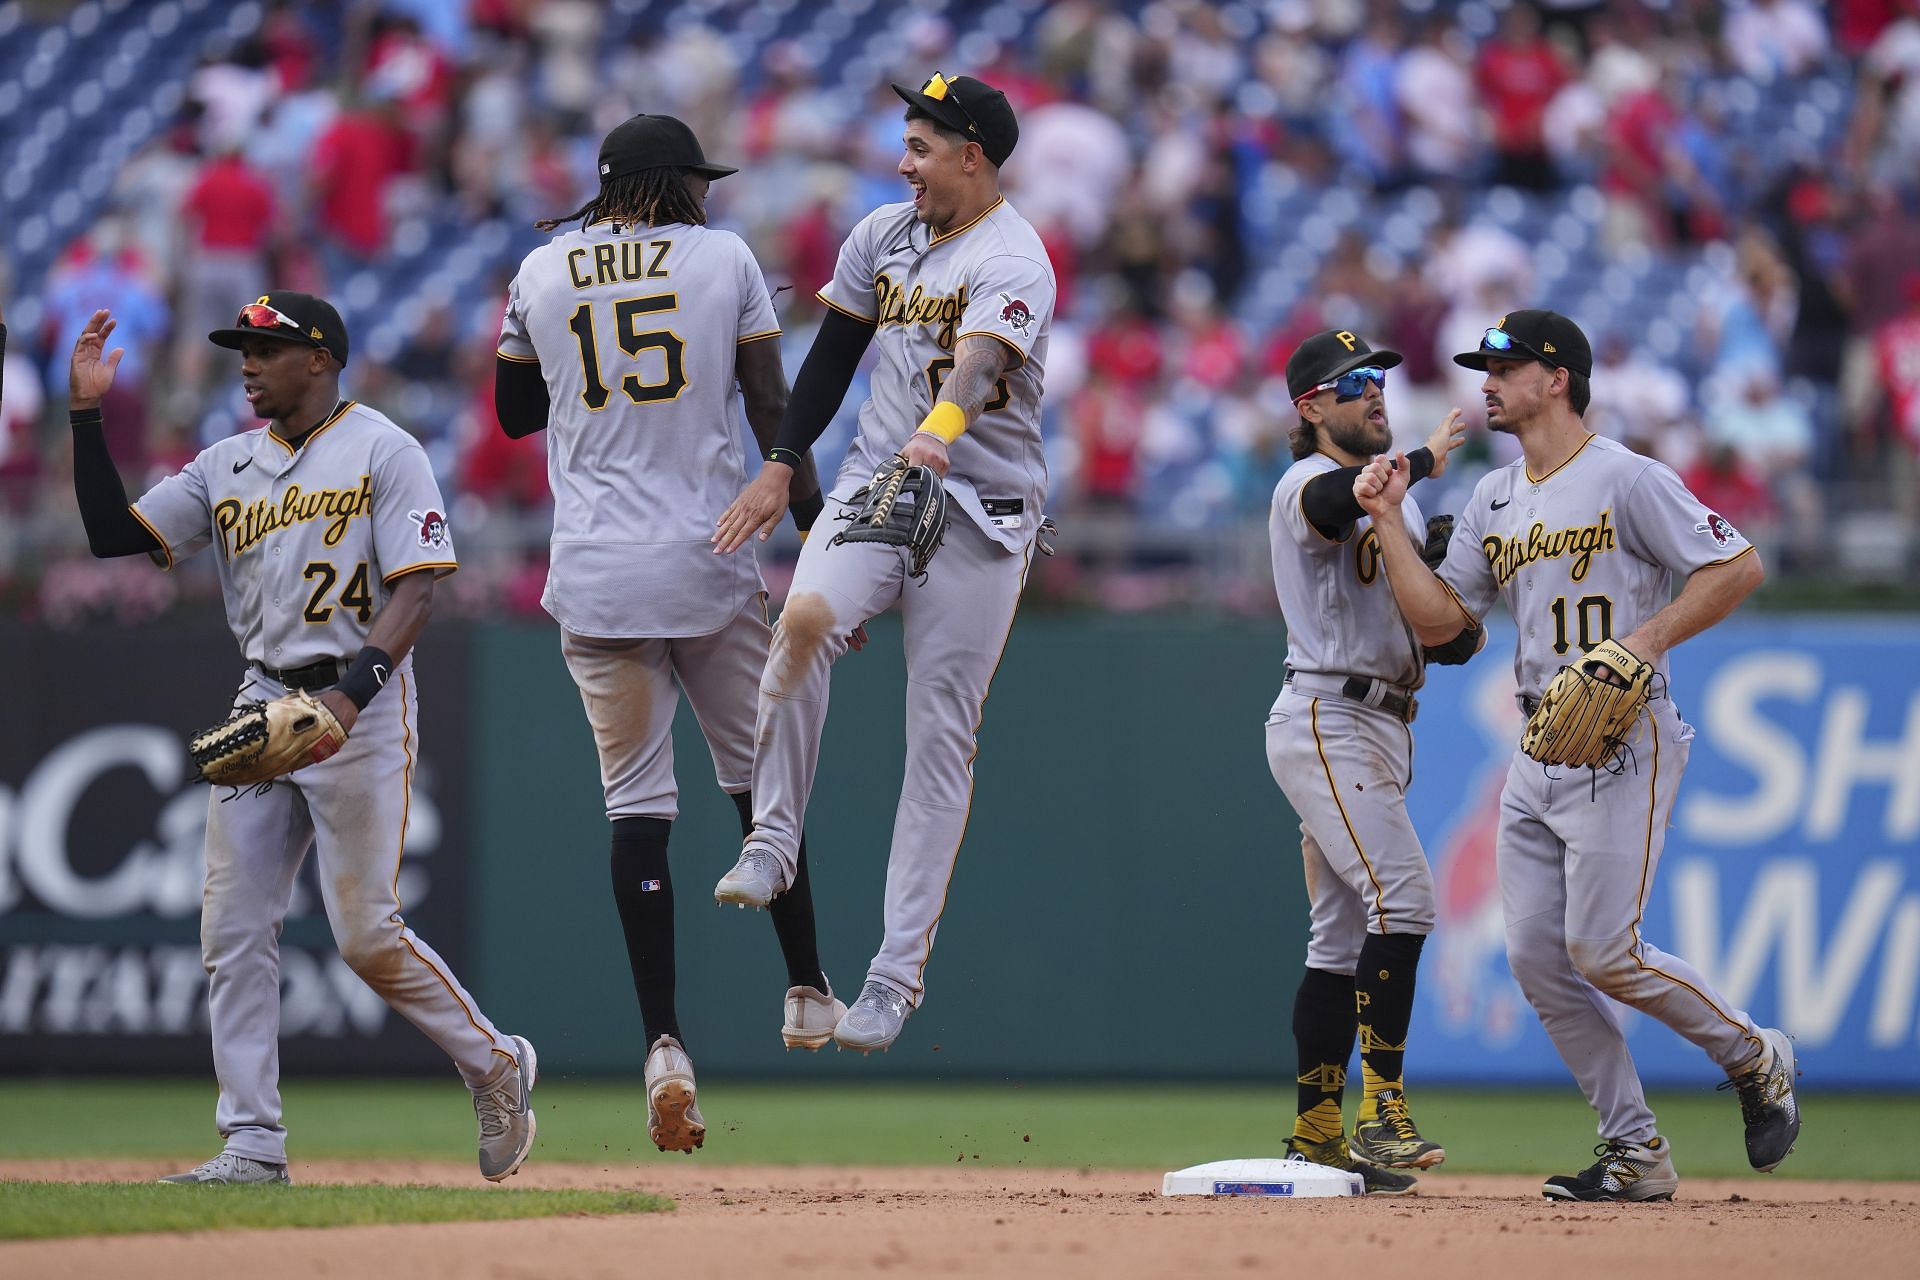 This Pirates team just isn't ready for a division title